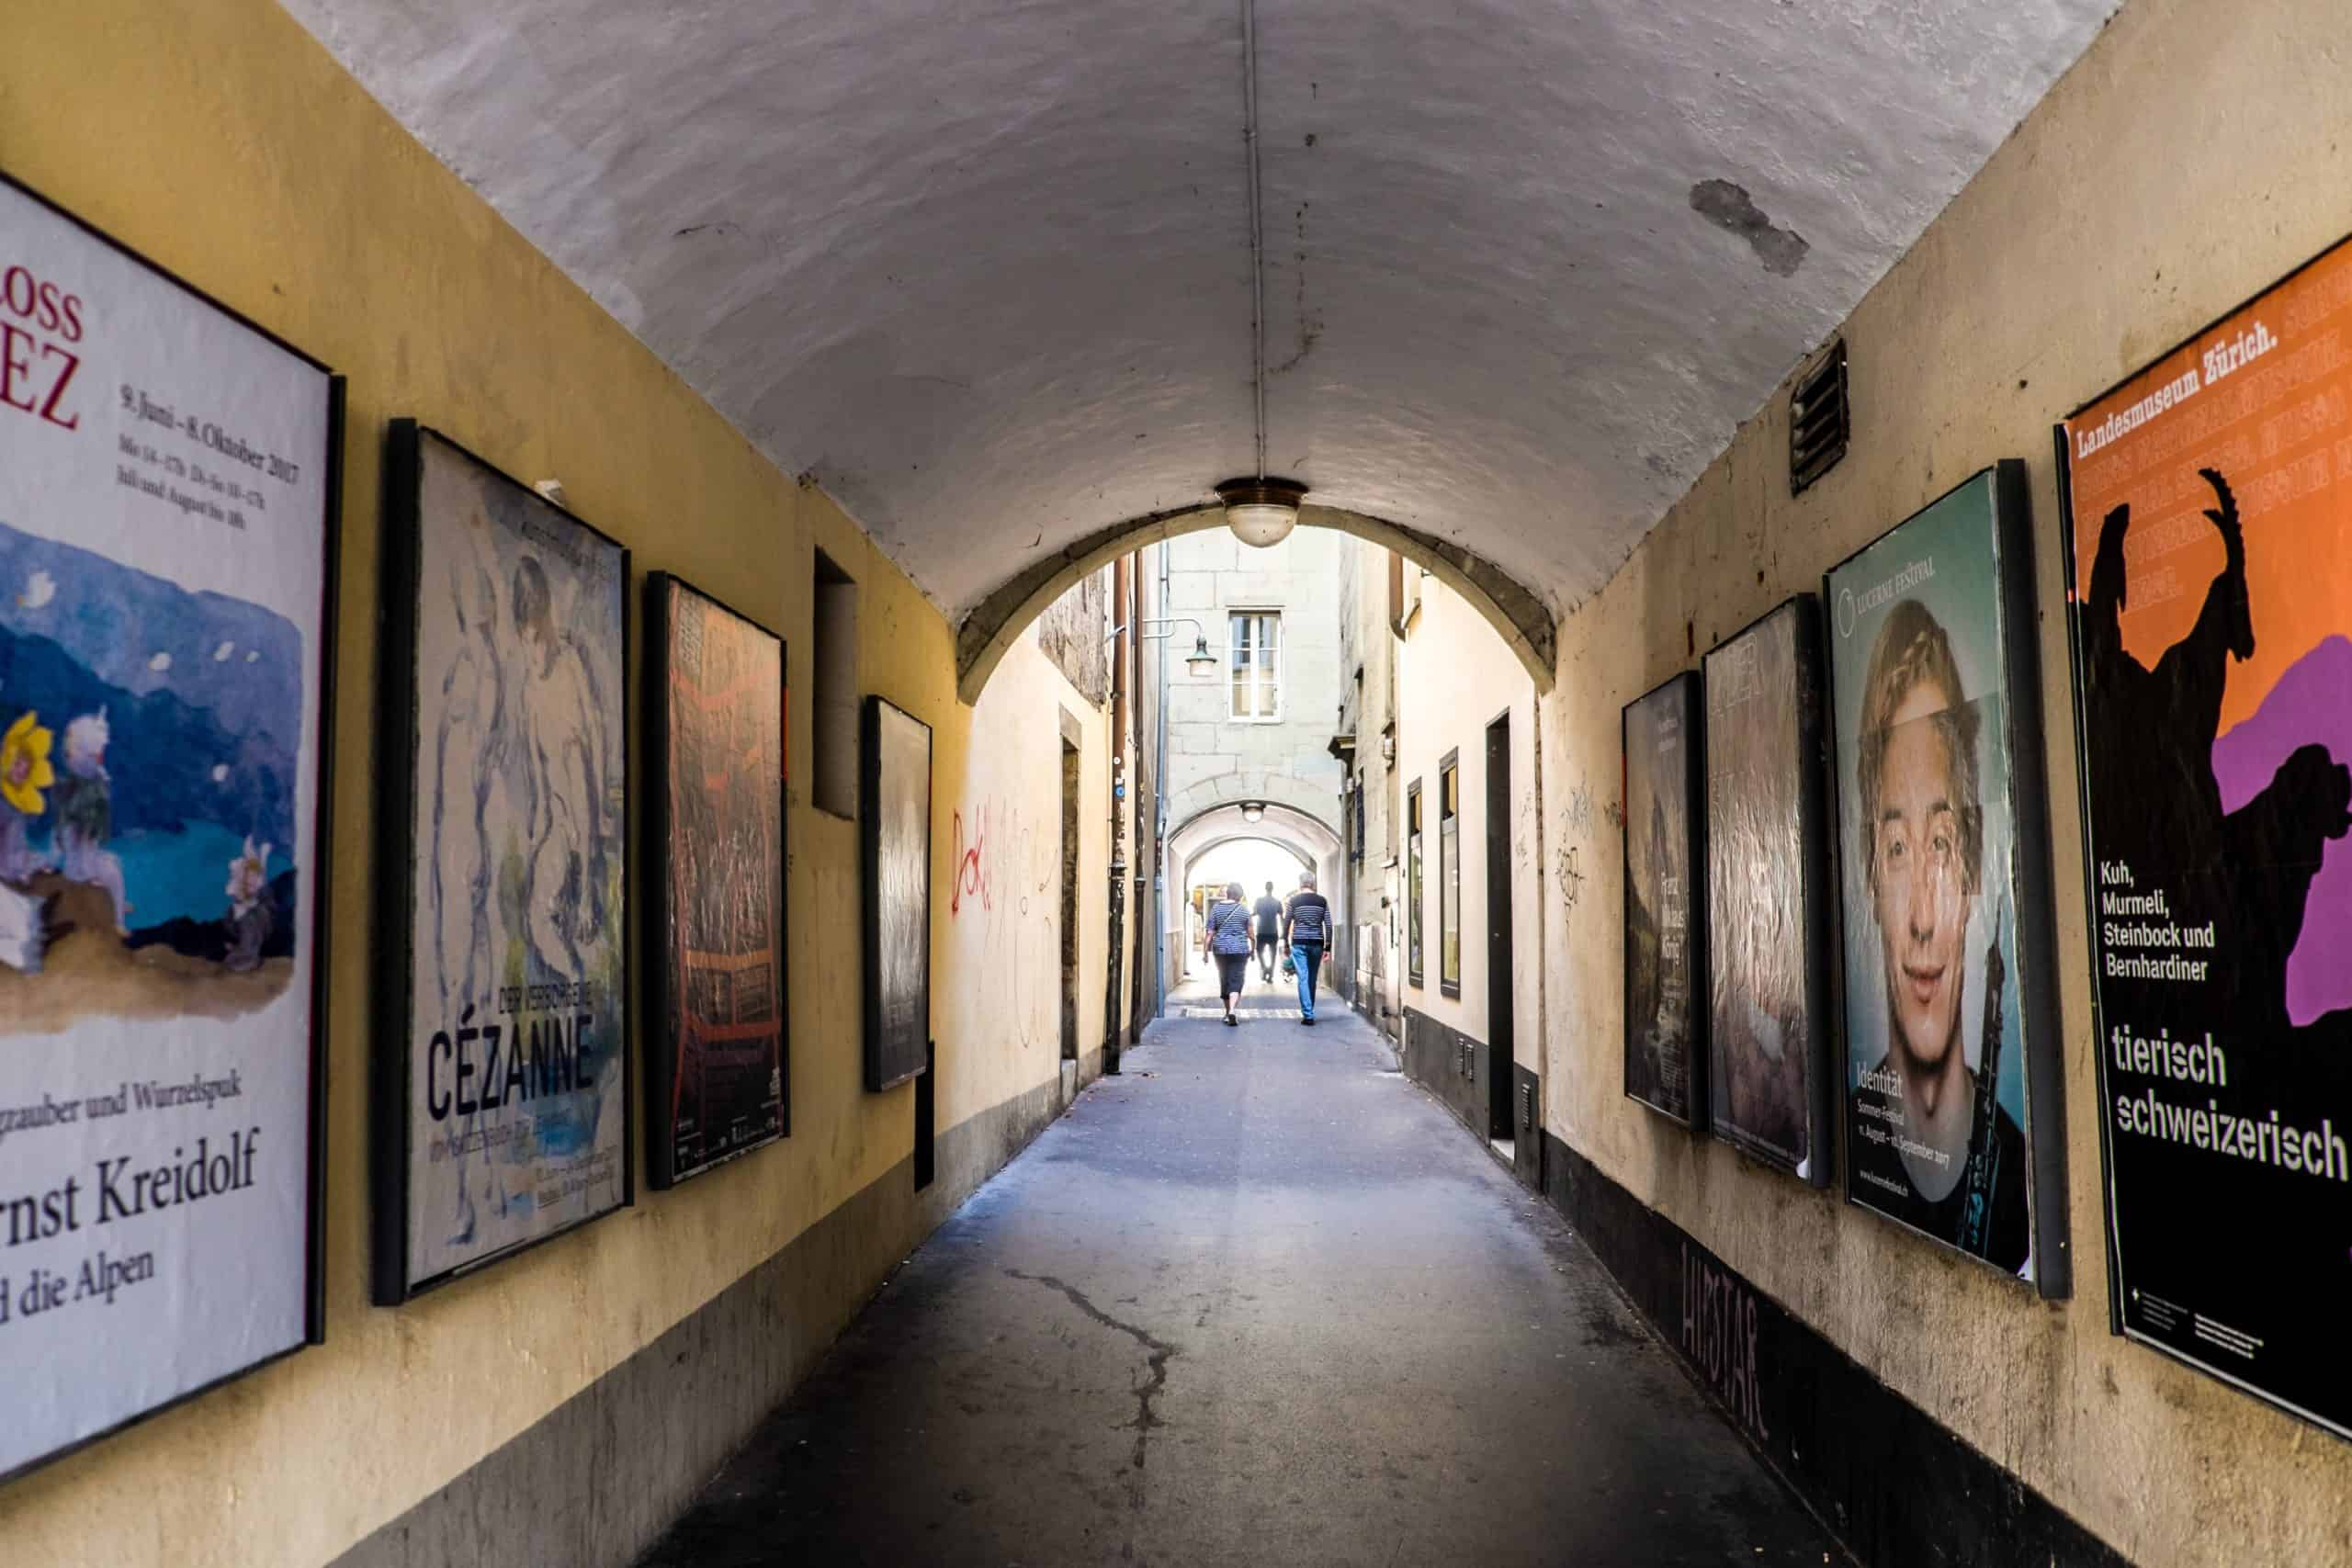 A narrow alleyway filled with cultural event posters in Switzerland's capital city of Bern